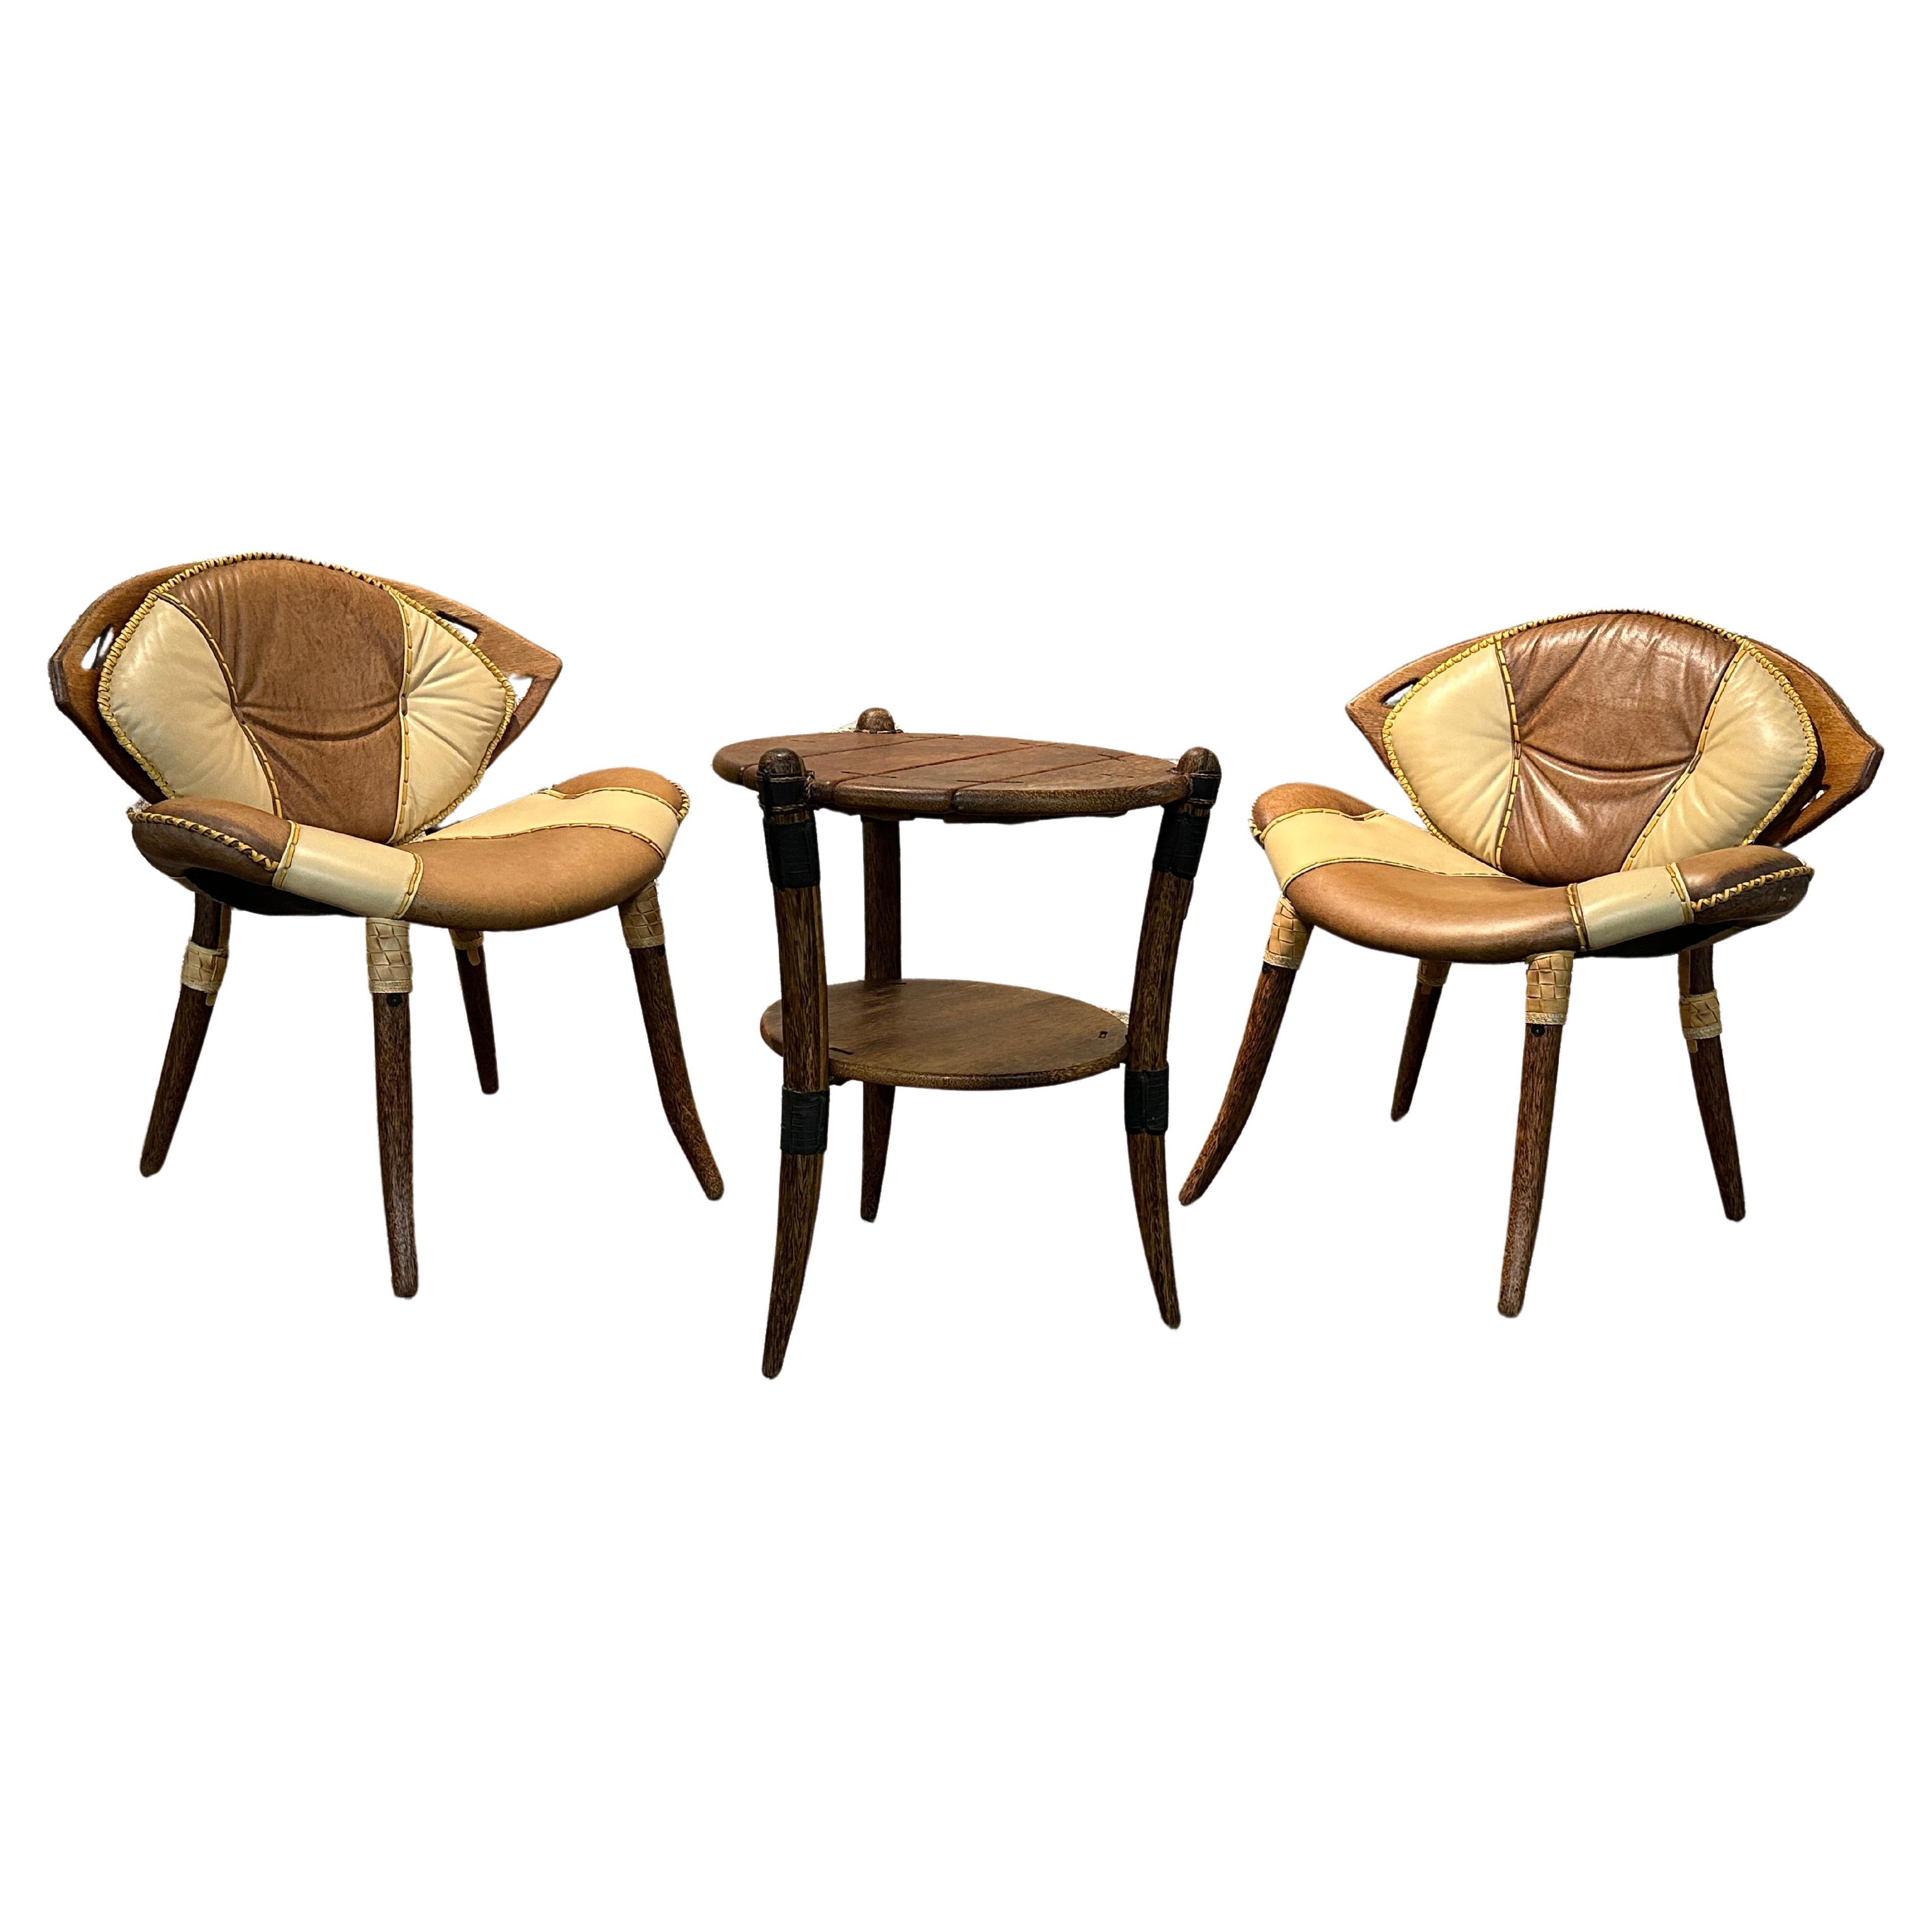 Palm Wood & Leather Zulu Set of Chairs and Table by Pacific Green Manufacture For Sale